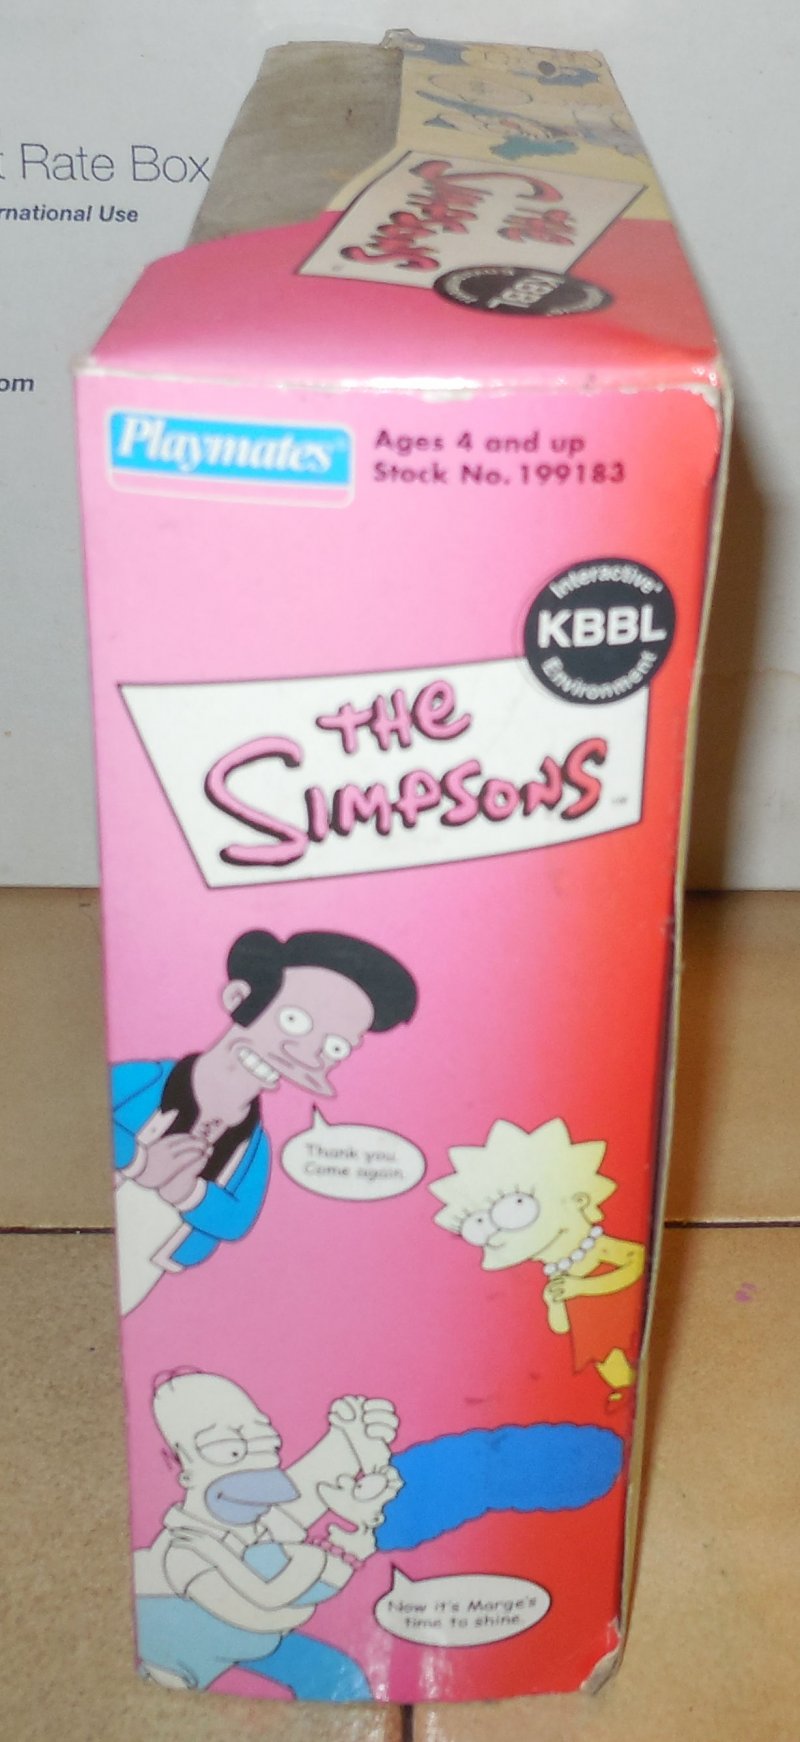 Image 4 of 2002 WOS Simpsons KBBL Interactive Environment With Exclusive Bill and Marty 